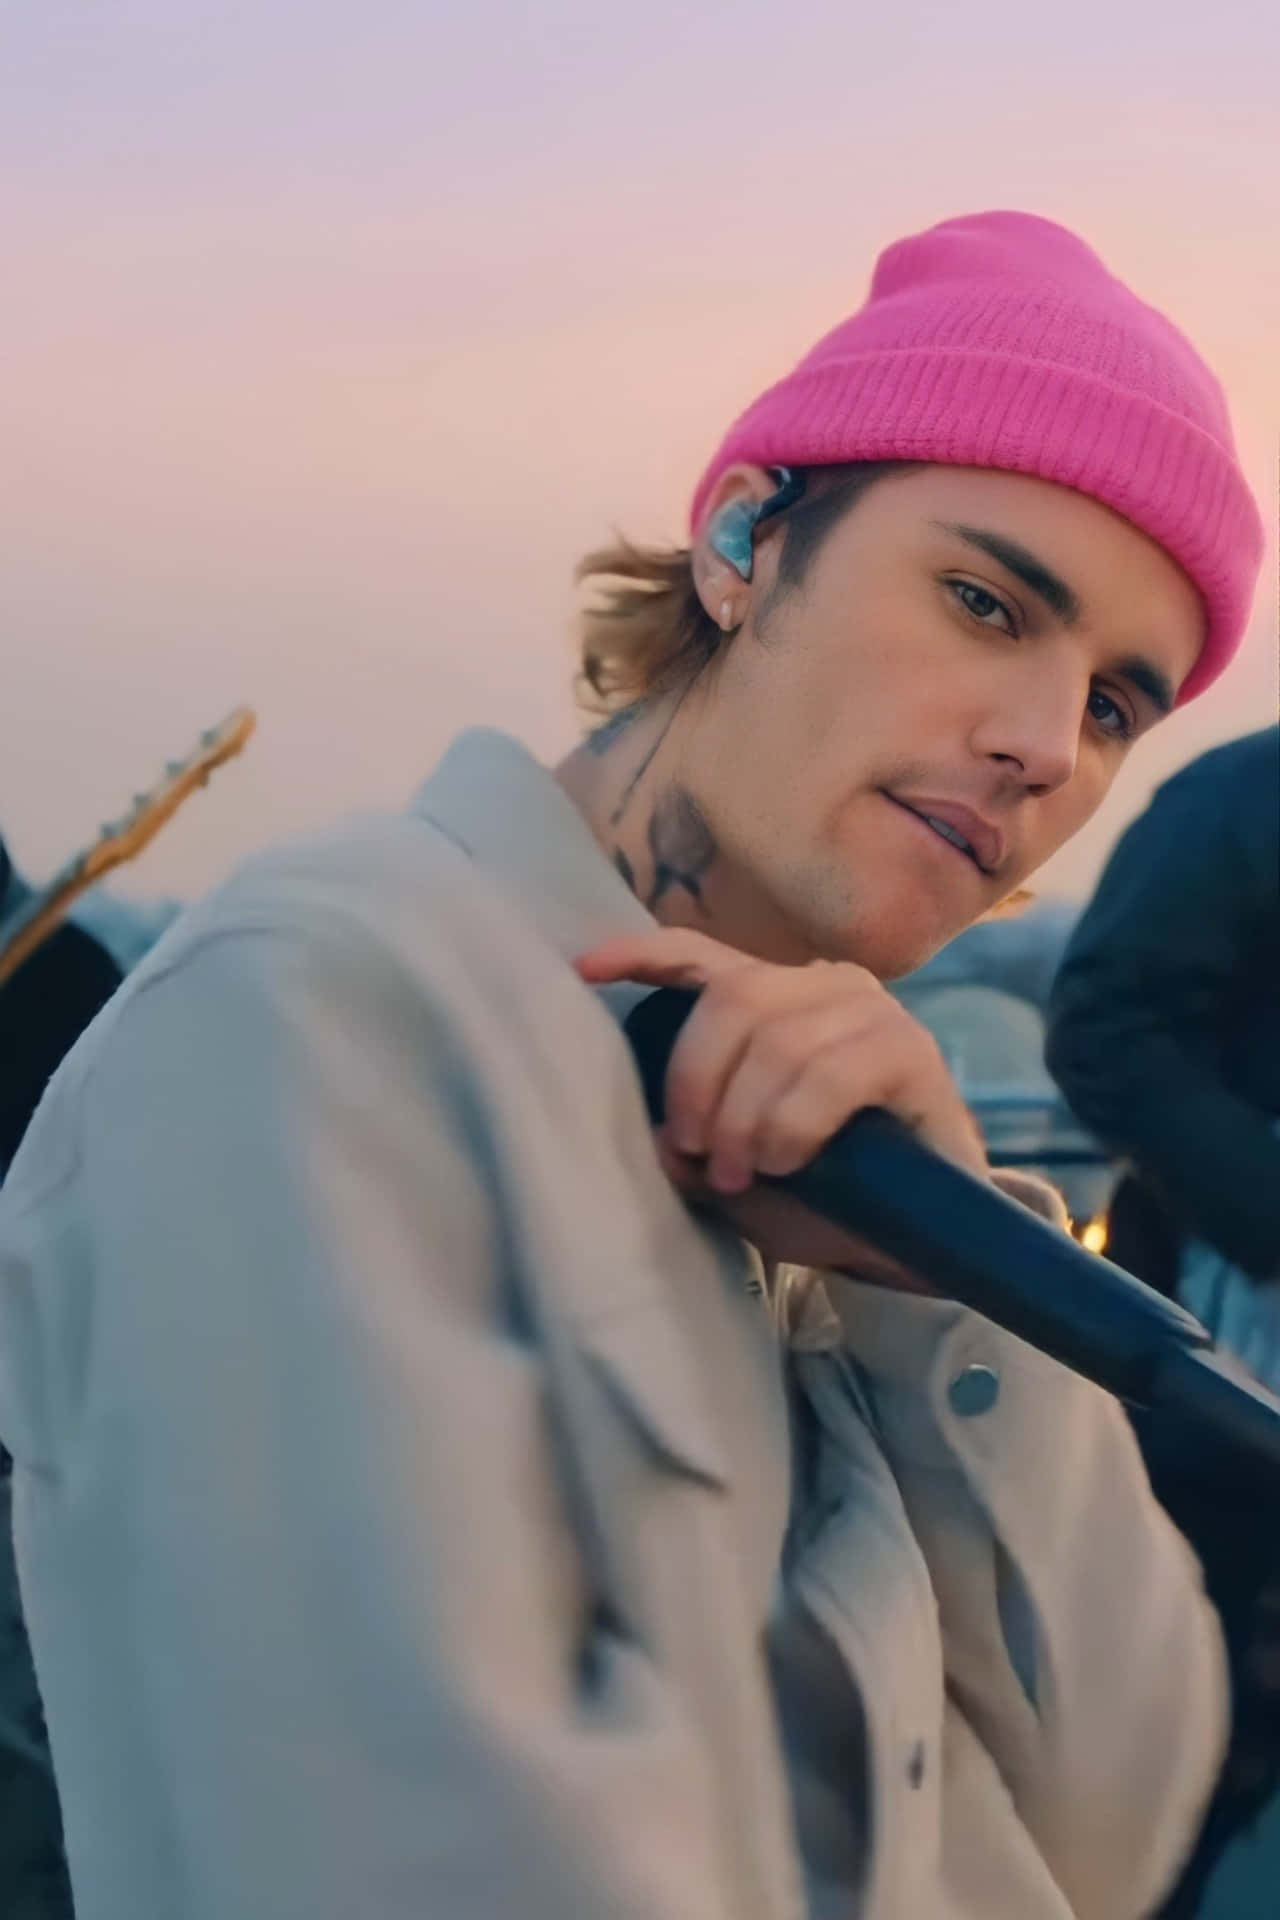 Justin Bieber Flaunting His Unique Style In 2021 Wallpaper